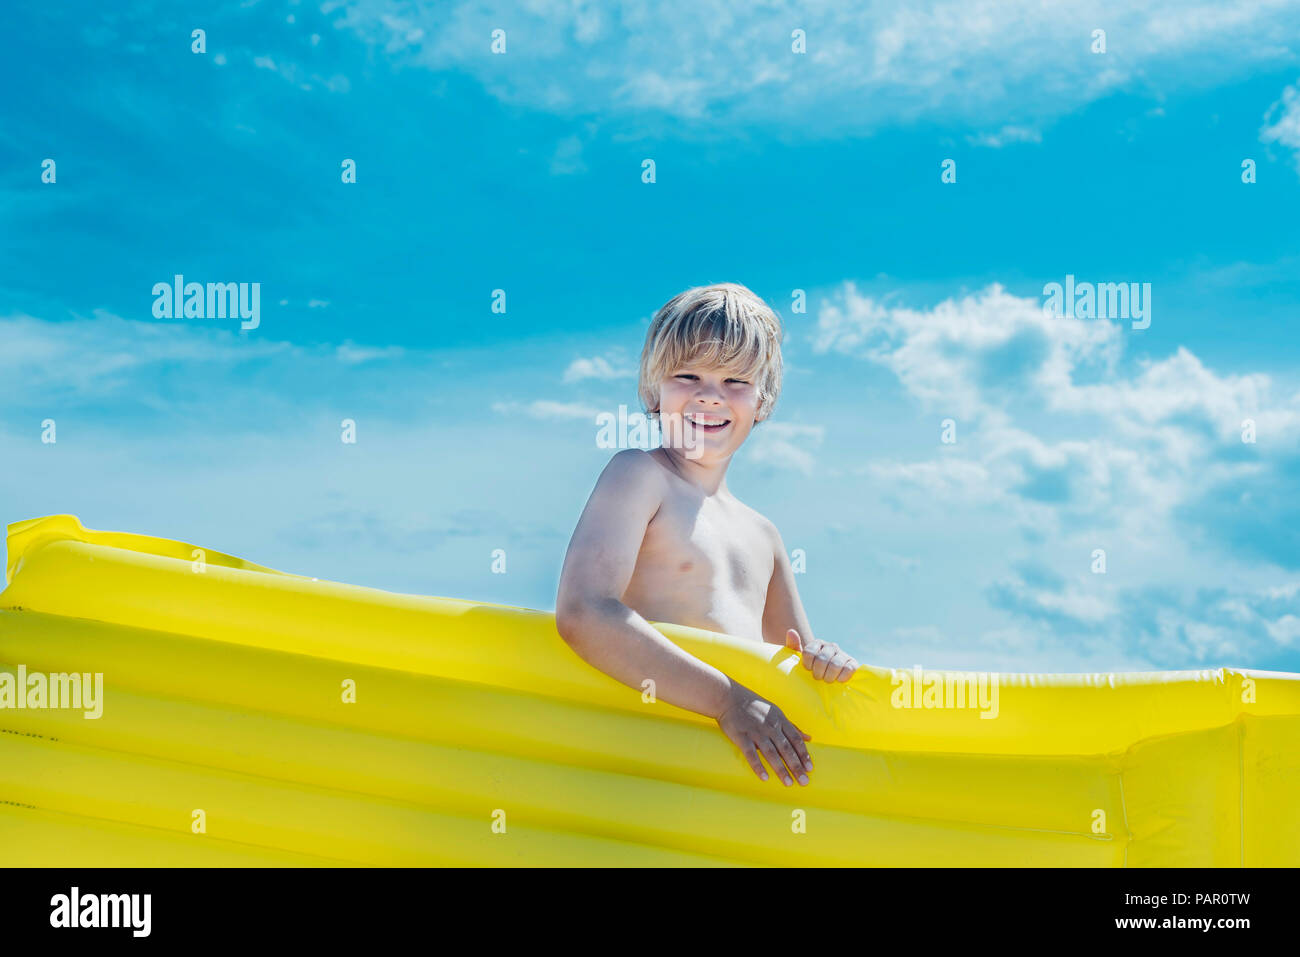 Portrait of happy boy carrying yellow airbed outdoors Stock Photo